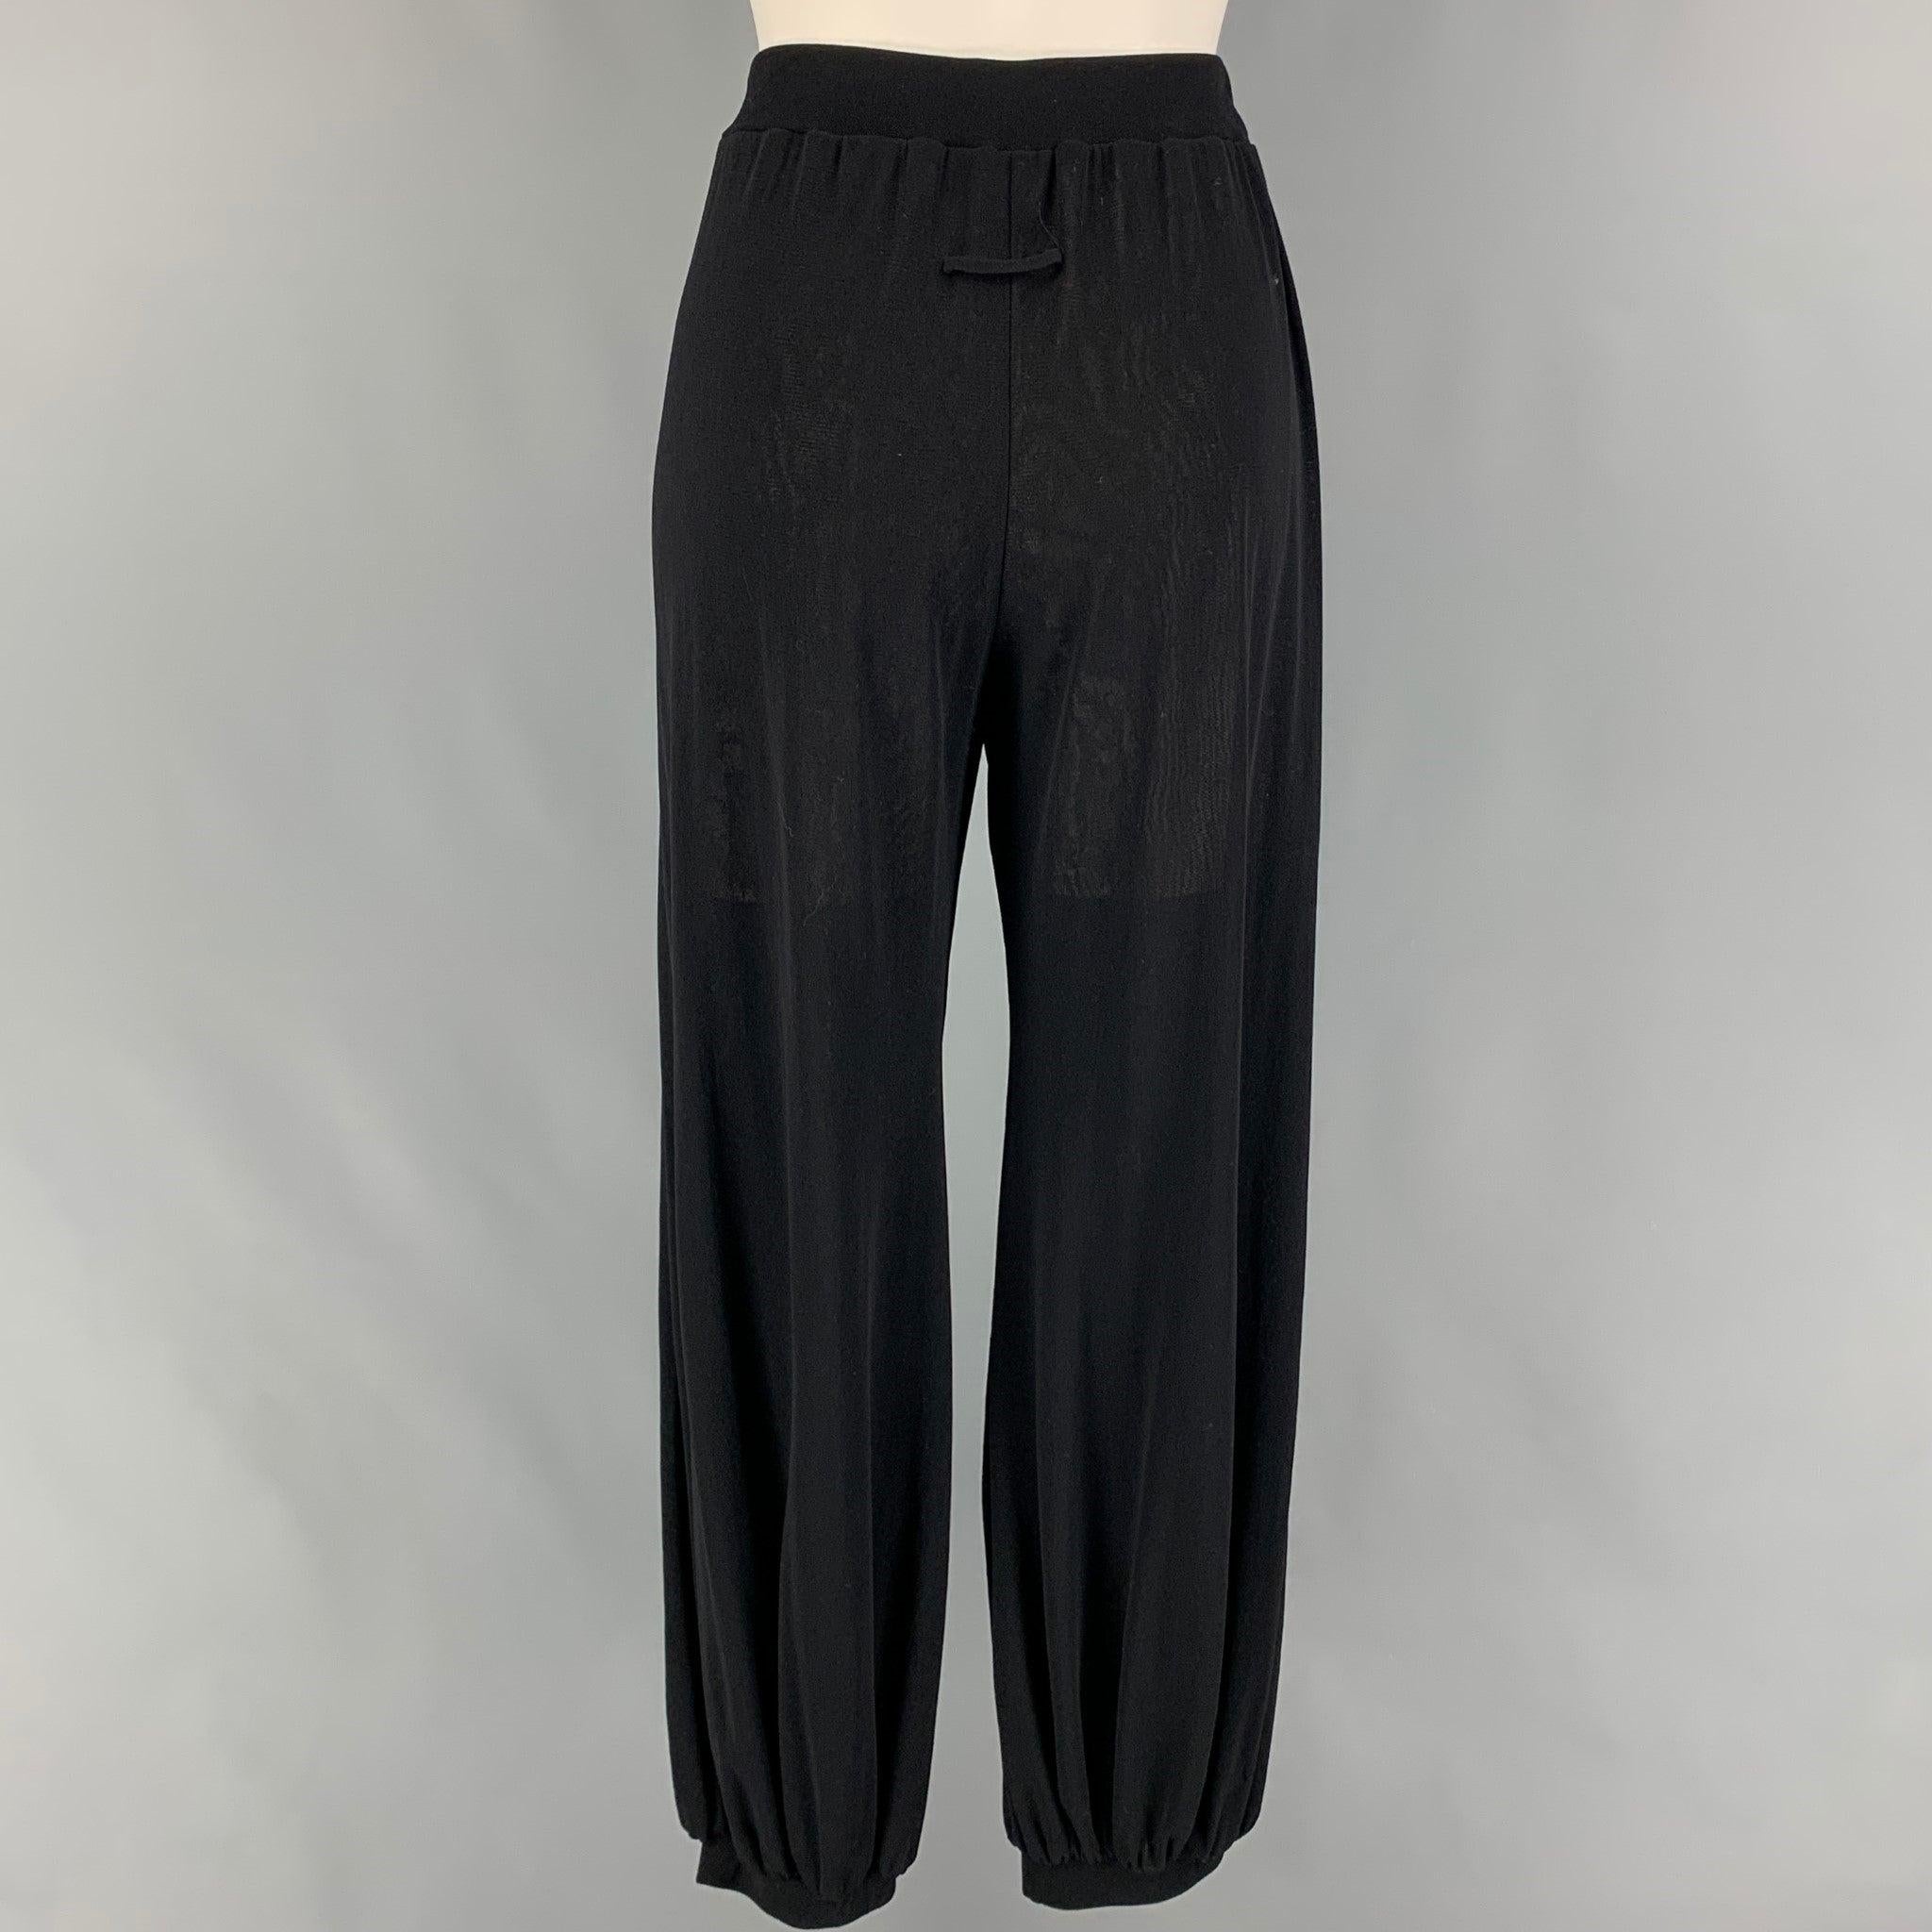 JEAN PAUL GAULTIER SOLEIL Size L Black Nylon Elastic Cuffs Casual Pants In Good Condition For Sale In San Francisco, CA